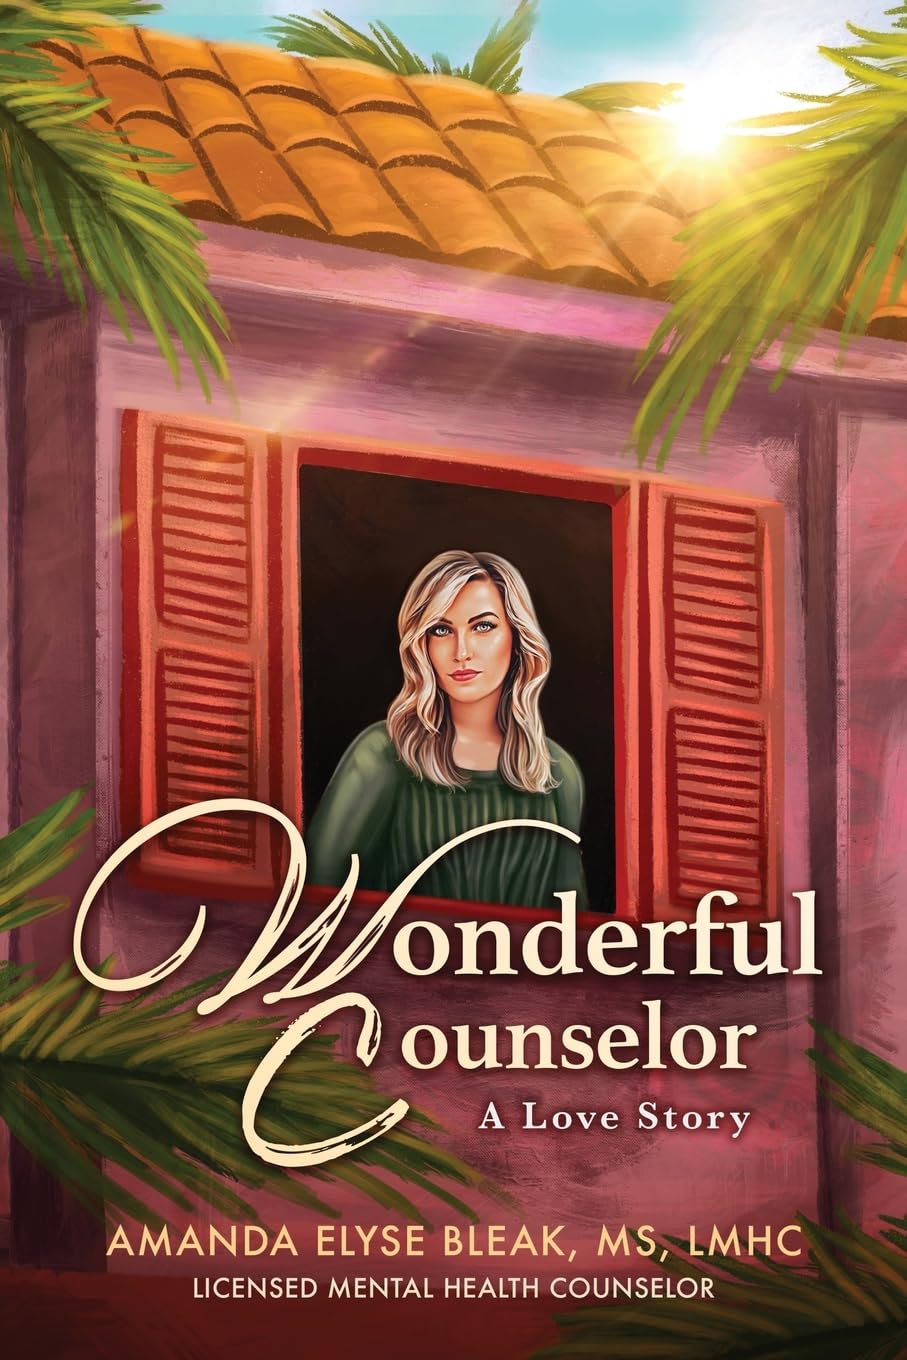 New novel "Wonderful Counselor" by Amanda Elyse Bleak, MS, LMHC is released, an inspirational story of a professional therapist who must face past trauma to stop her path of self-destruction